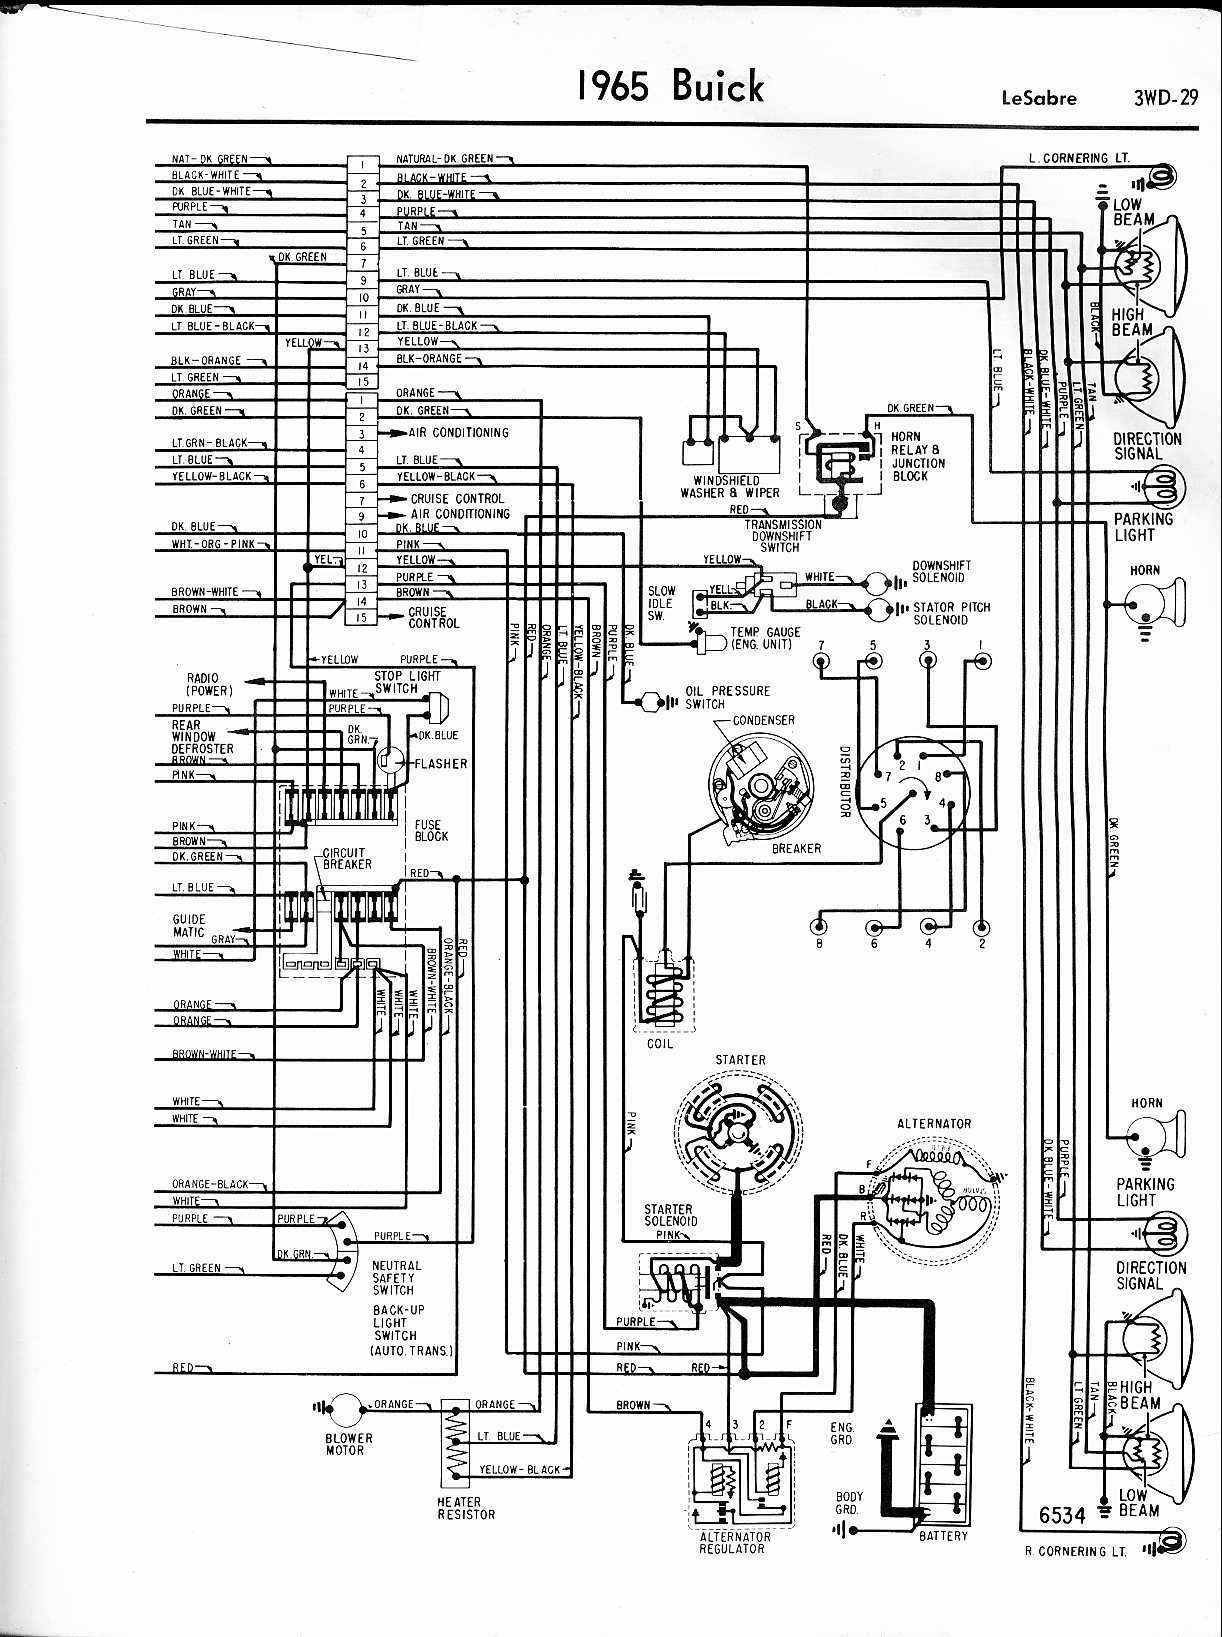 2001 Buick Century Power Window Wiring Diagram from www.oldcarmanualproject.com